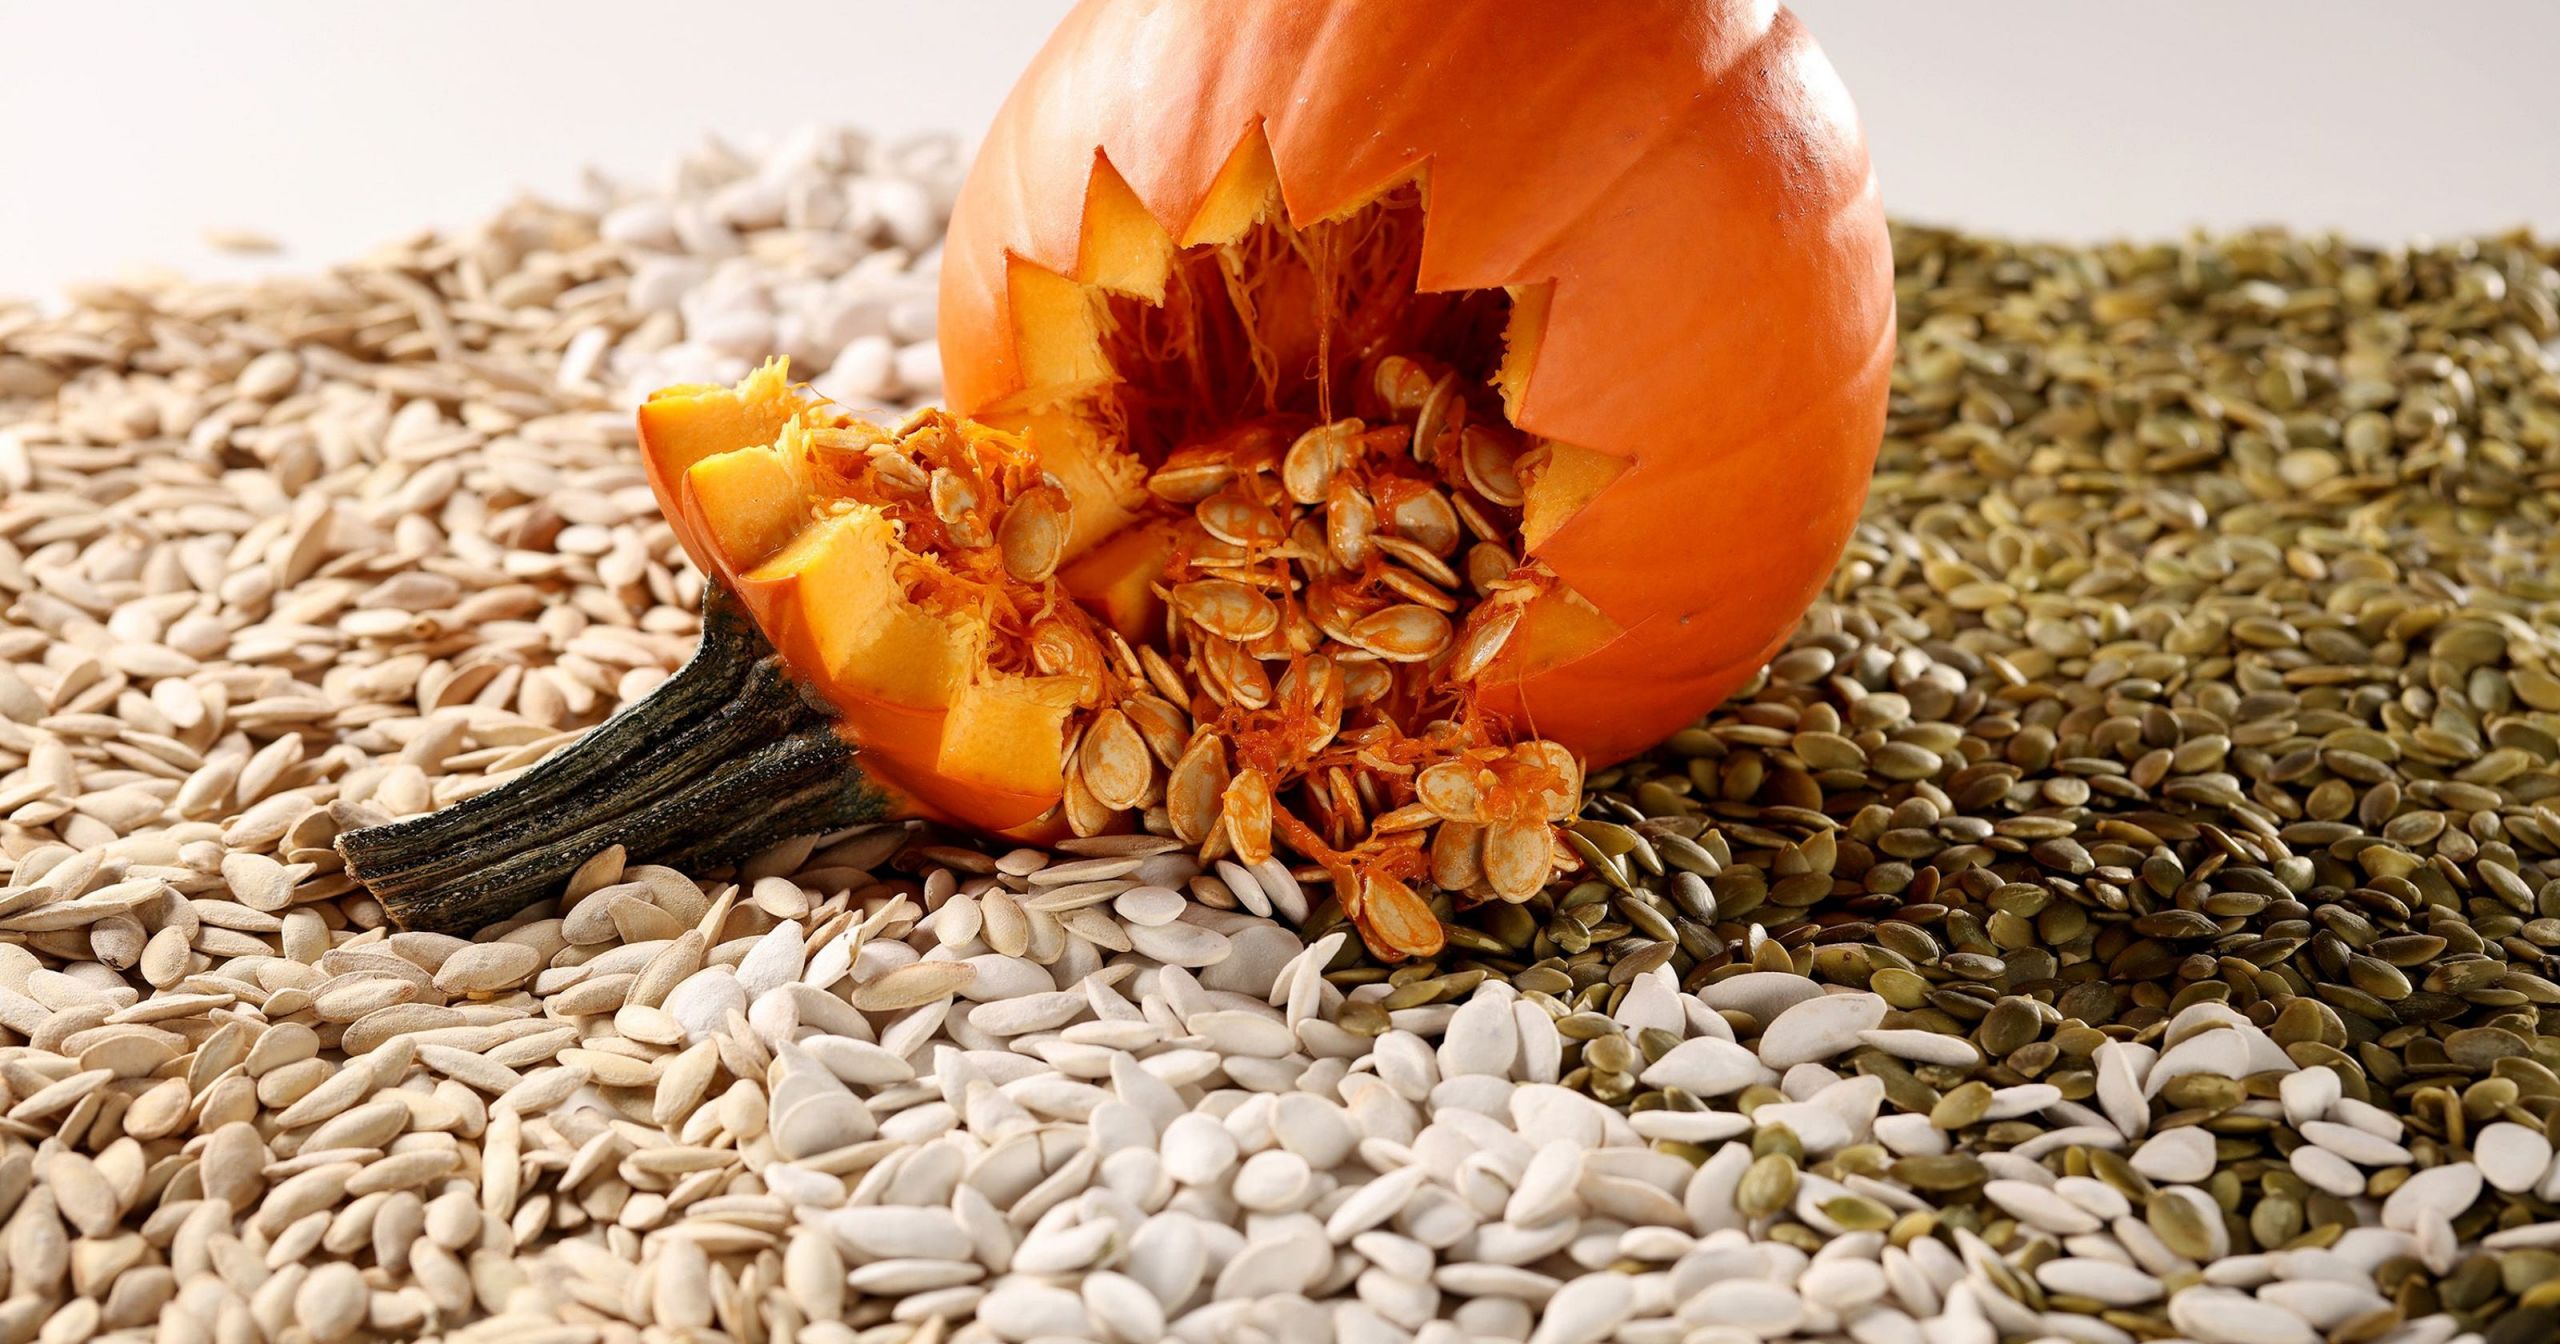 Microwave Pumpkin Seeds
 Cook with pumpkin seeds the unsung heroes of October